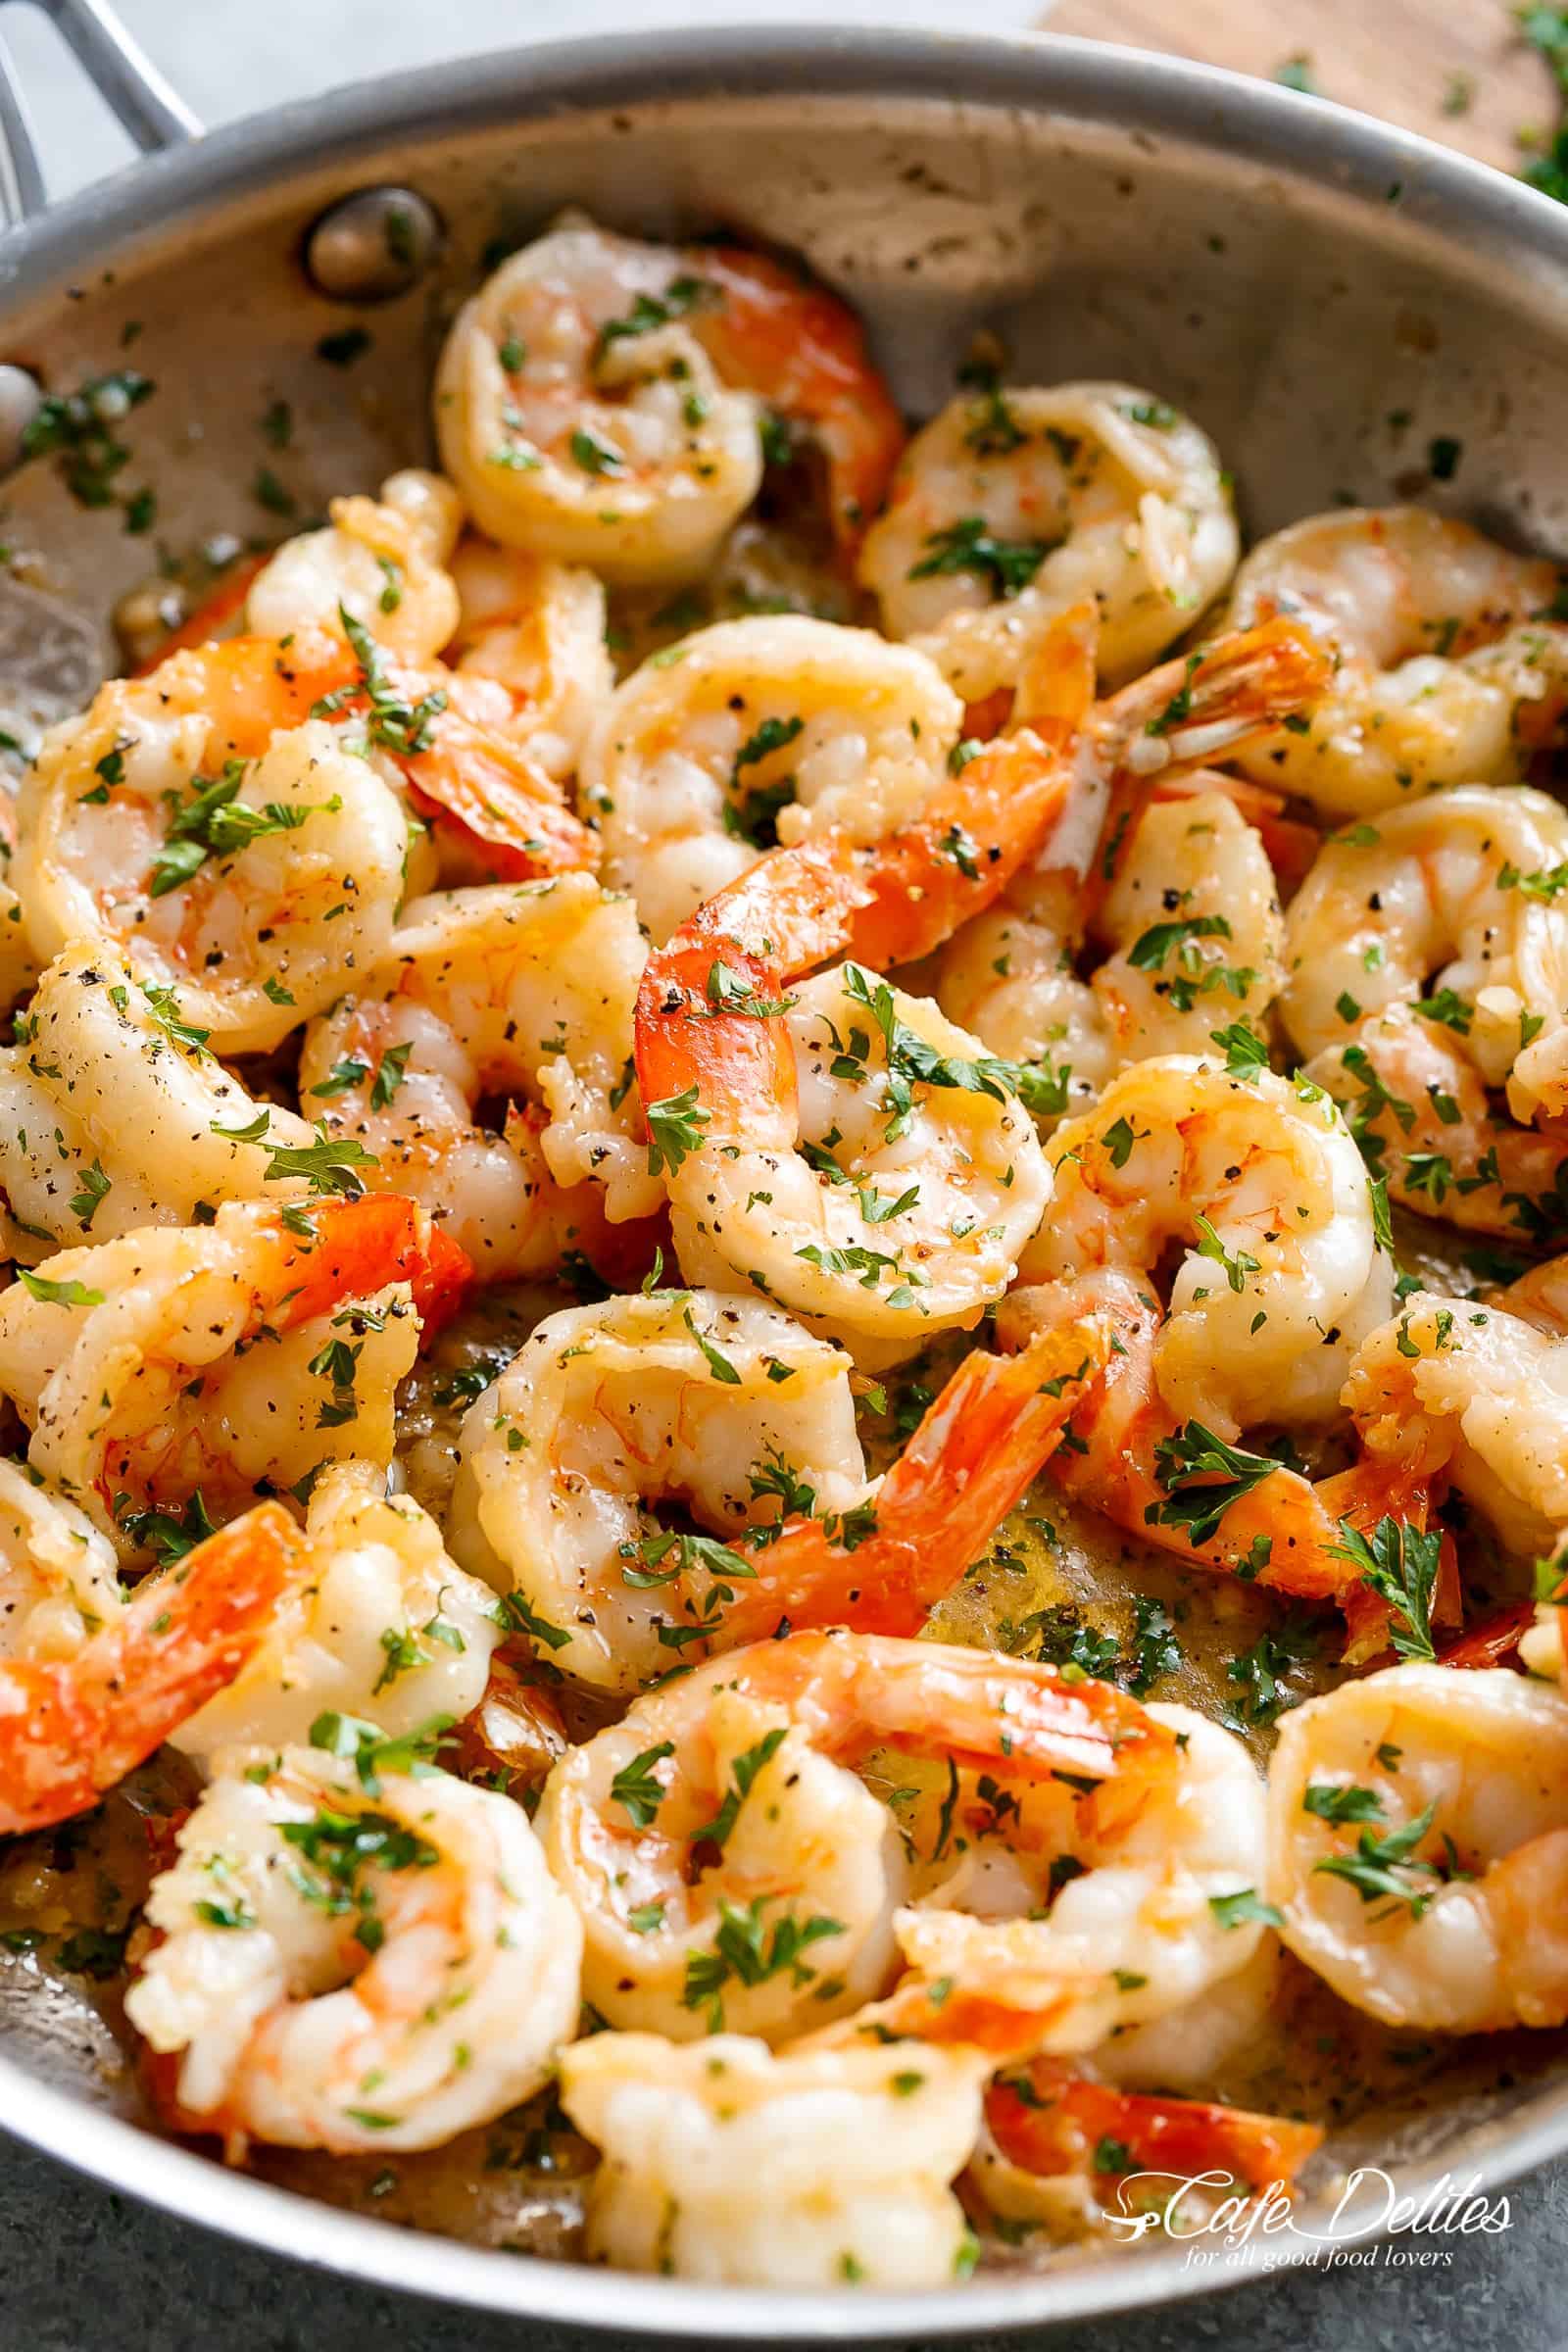 Garlic Butter Shrimp Scampi is so quick and easy! A garlic buttery scampi sauce with a hint of white wine & lemon in less than 10 minutes! Serve as an appetizer/light meal OR for dinner with pasta! Keep it low carb and serve it over zucchini noodles or with steamed cauliflower! | cafedelites.com